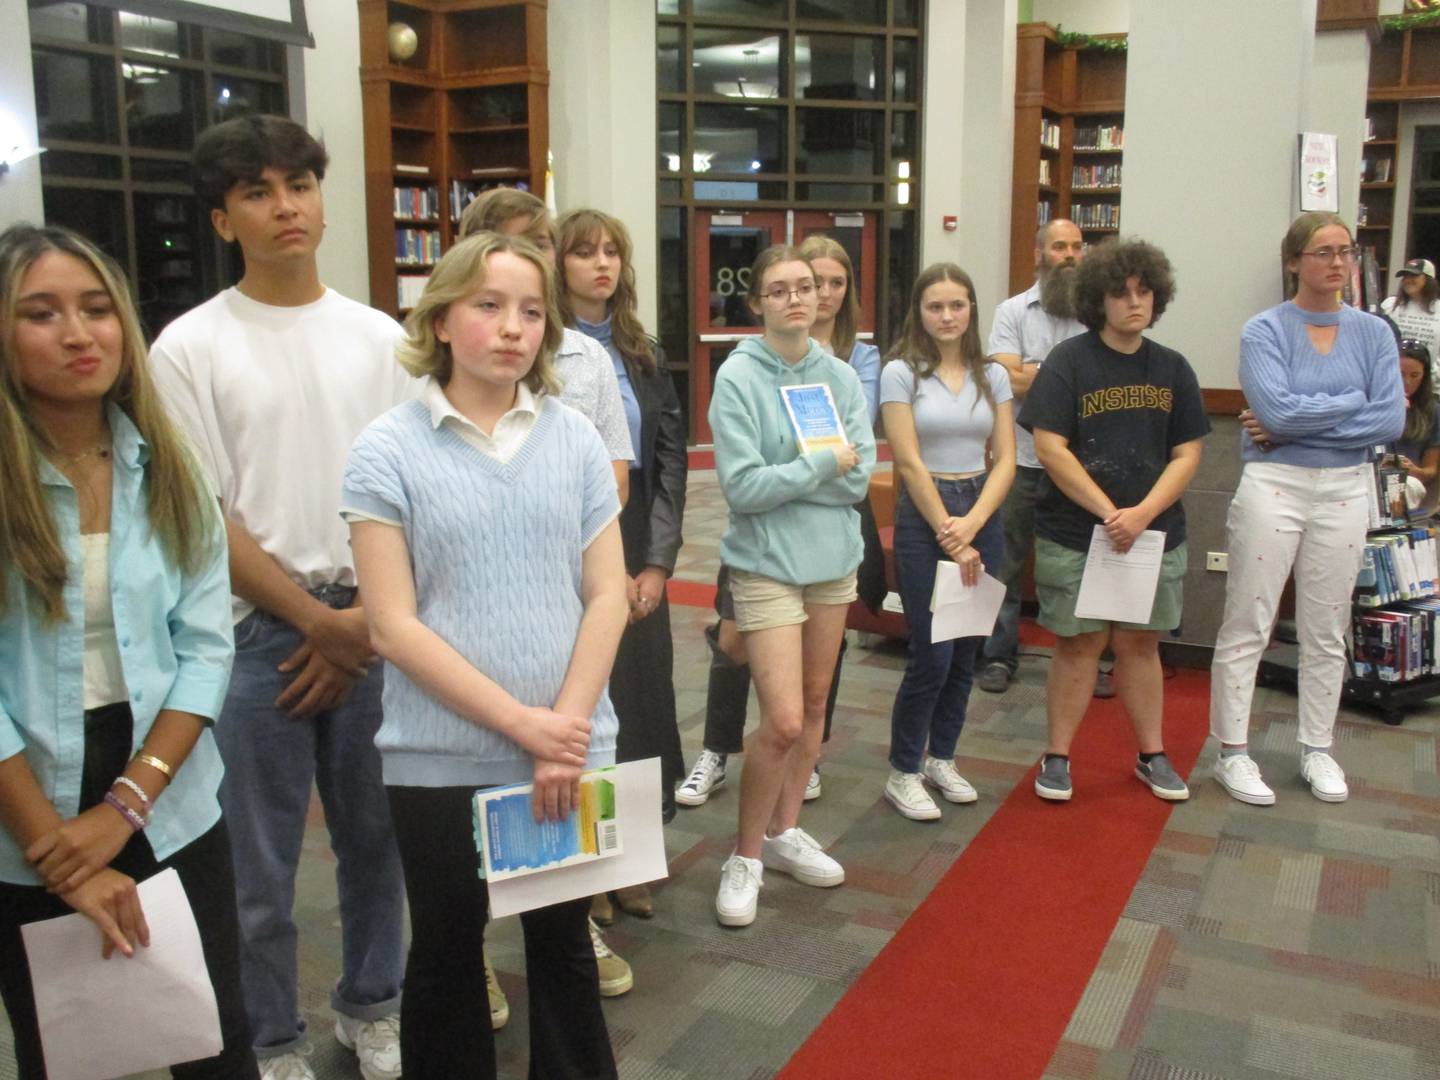 Yorkville High School students who spoke before the Yorkville School Board on Sept. 25, 2023 at the high school library listen to the discussion about the board's decision to prohibit use of the book "Just Mercy" in an English class.